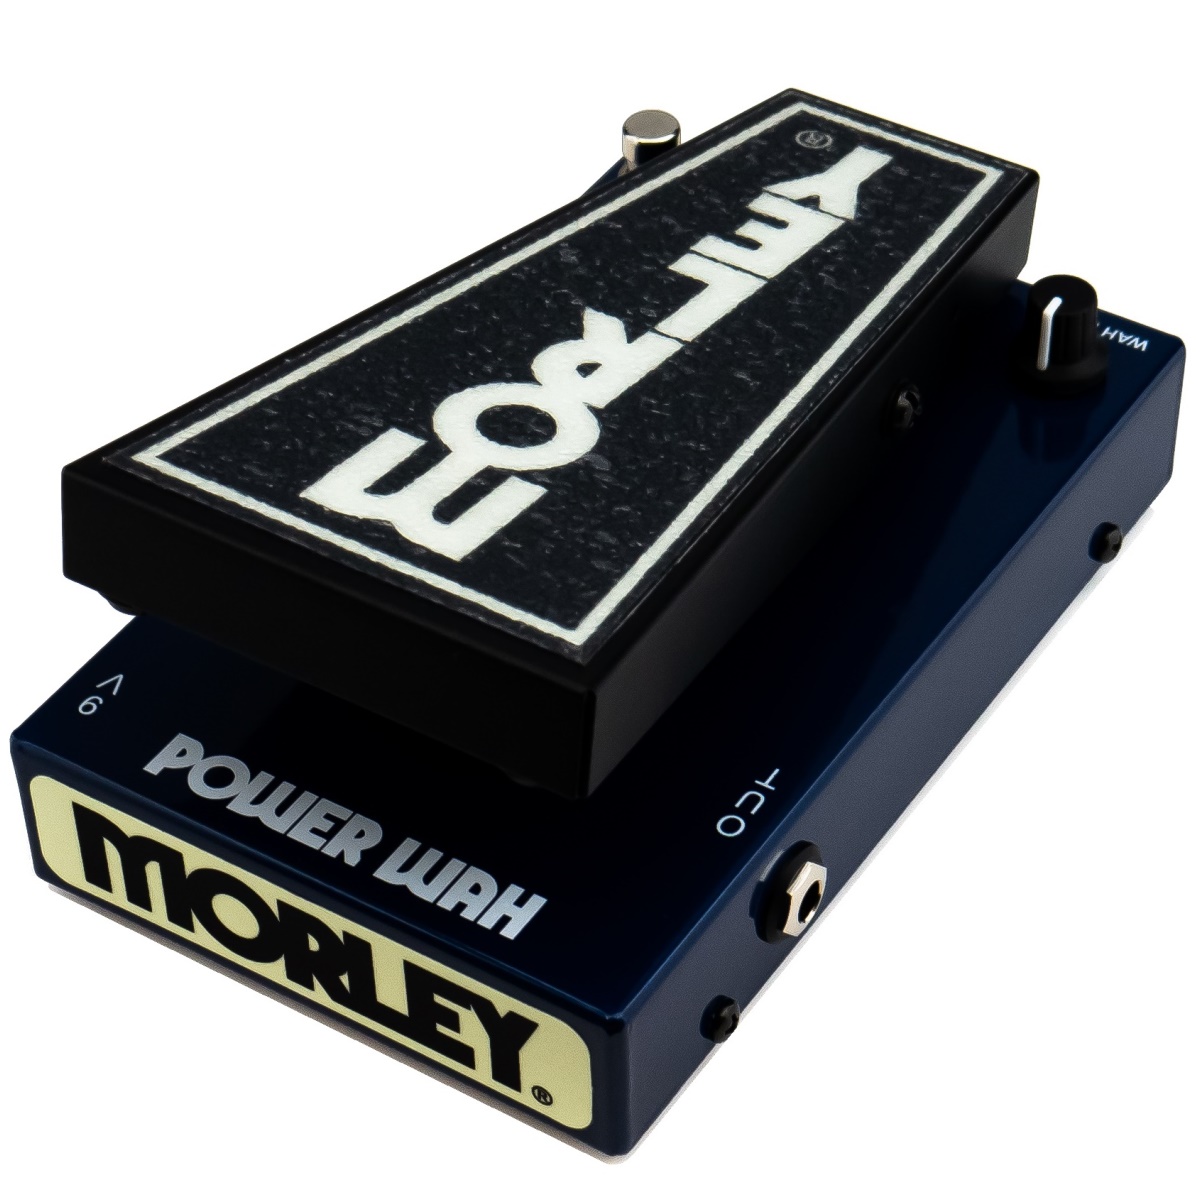 MORLEY 2020 POWER WAH EFFETTO WAH A PEDALE PER CHITARRA 3